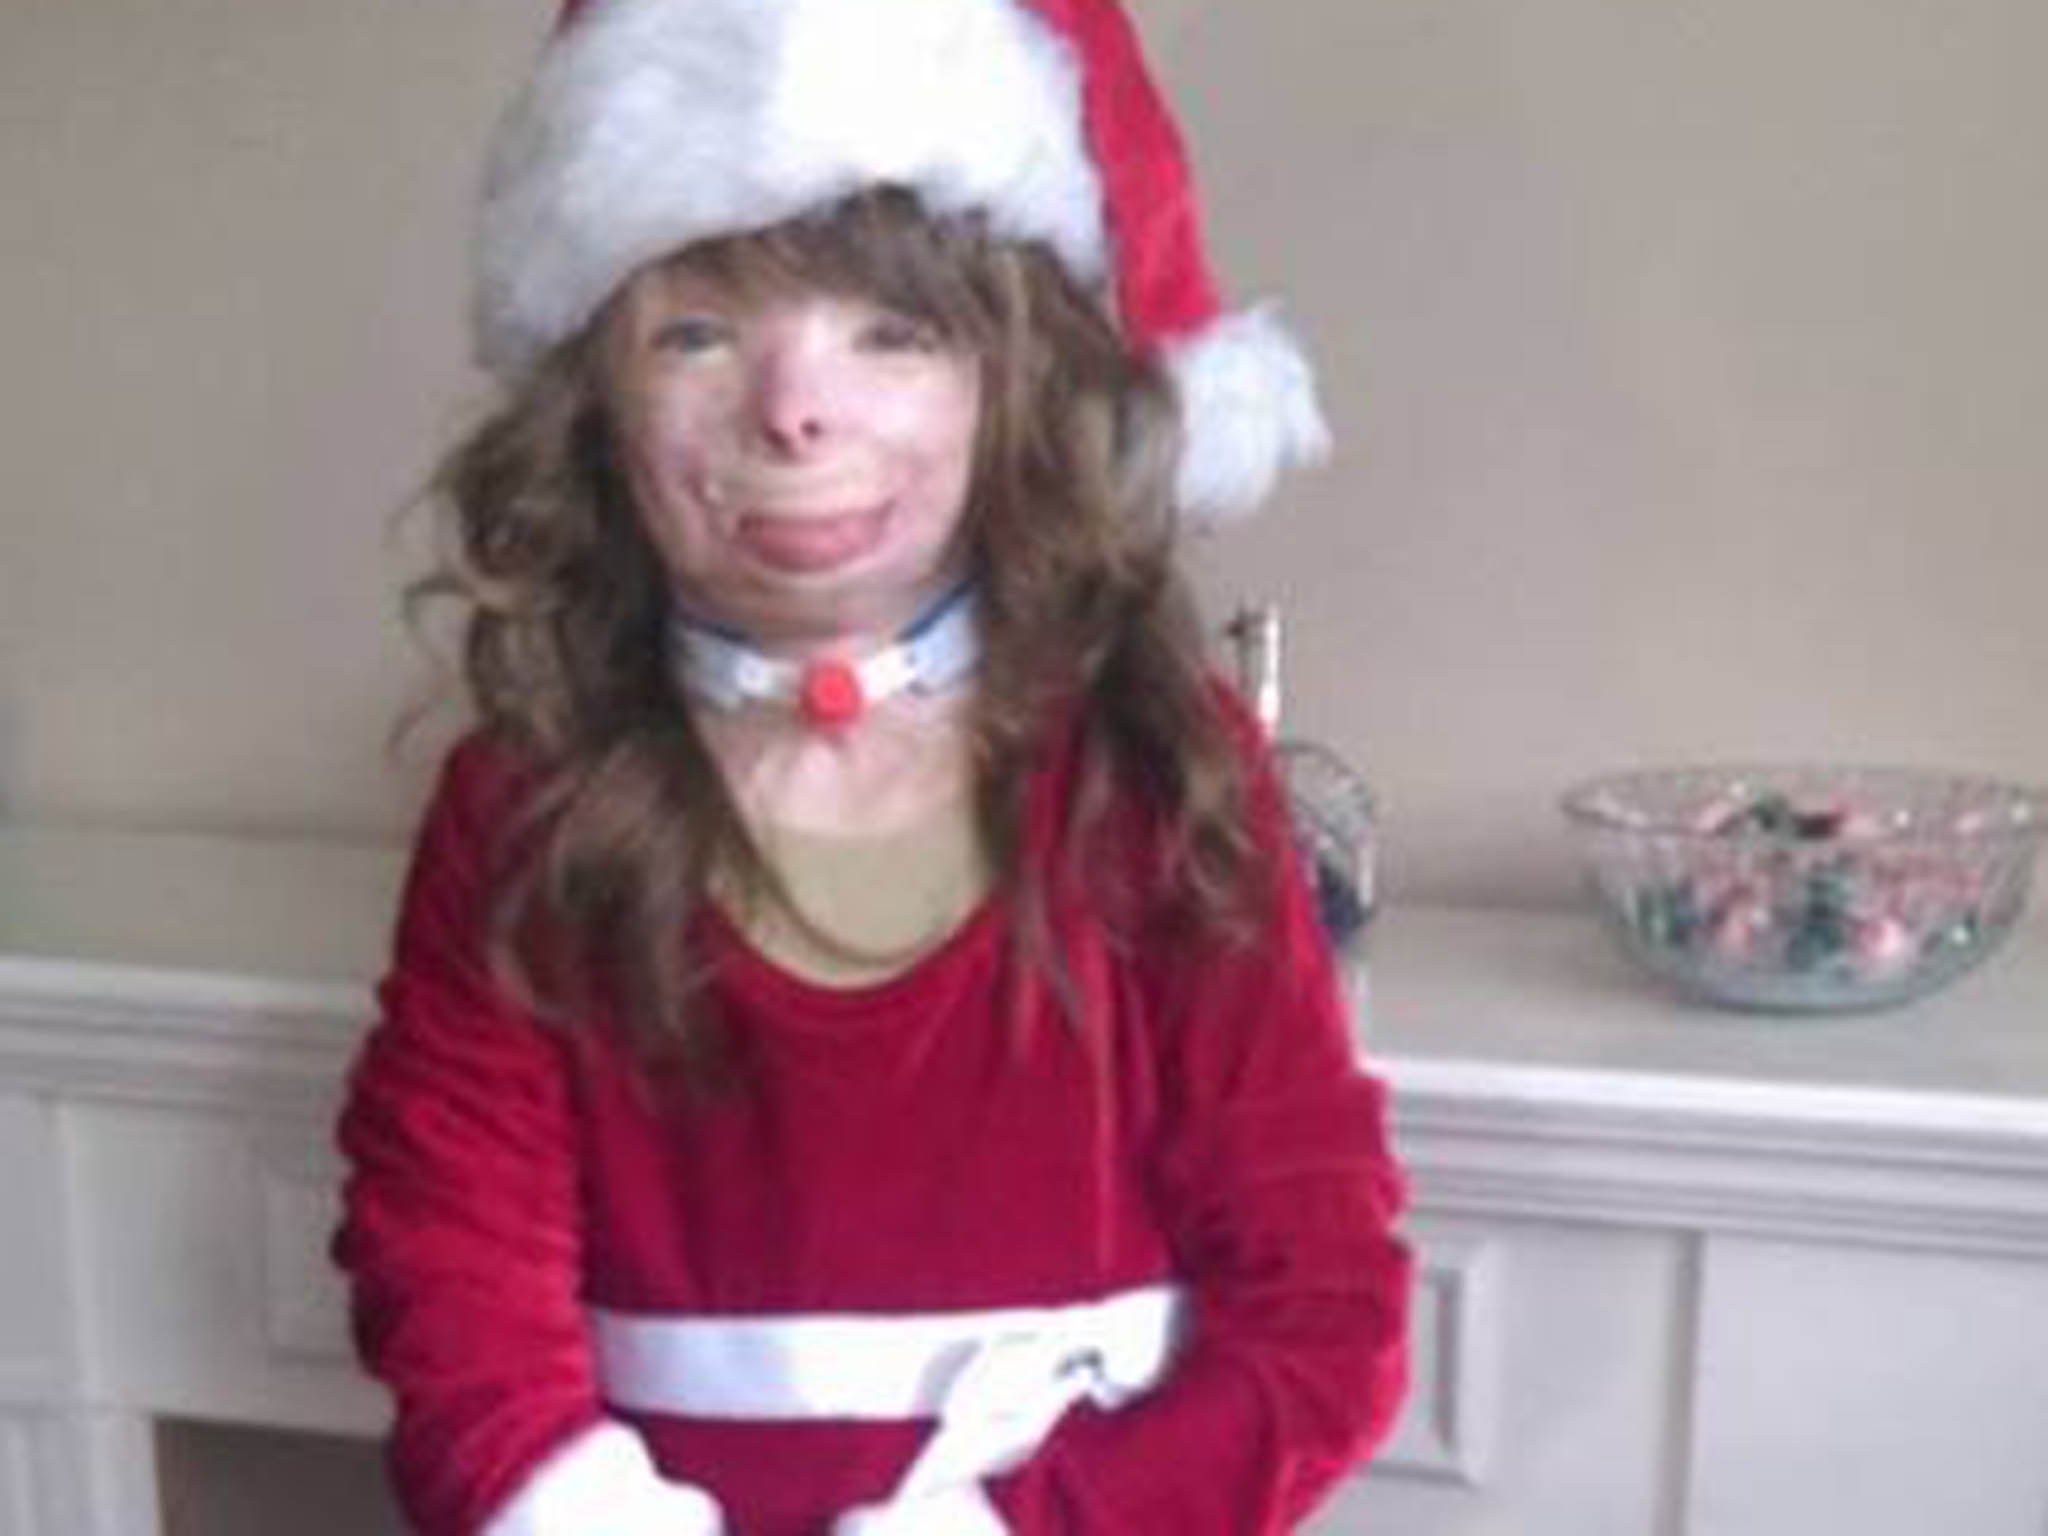 Safyre Terry, 8, was the only survivor of the arson attack on her home